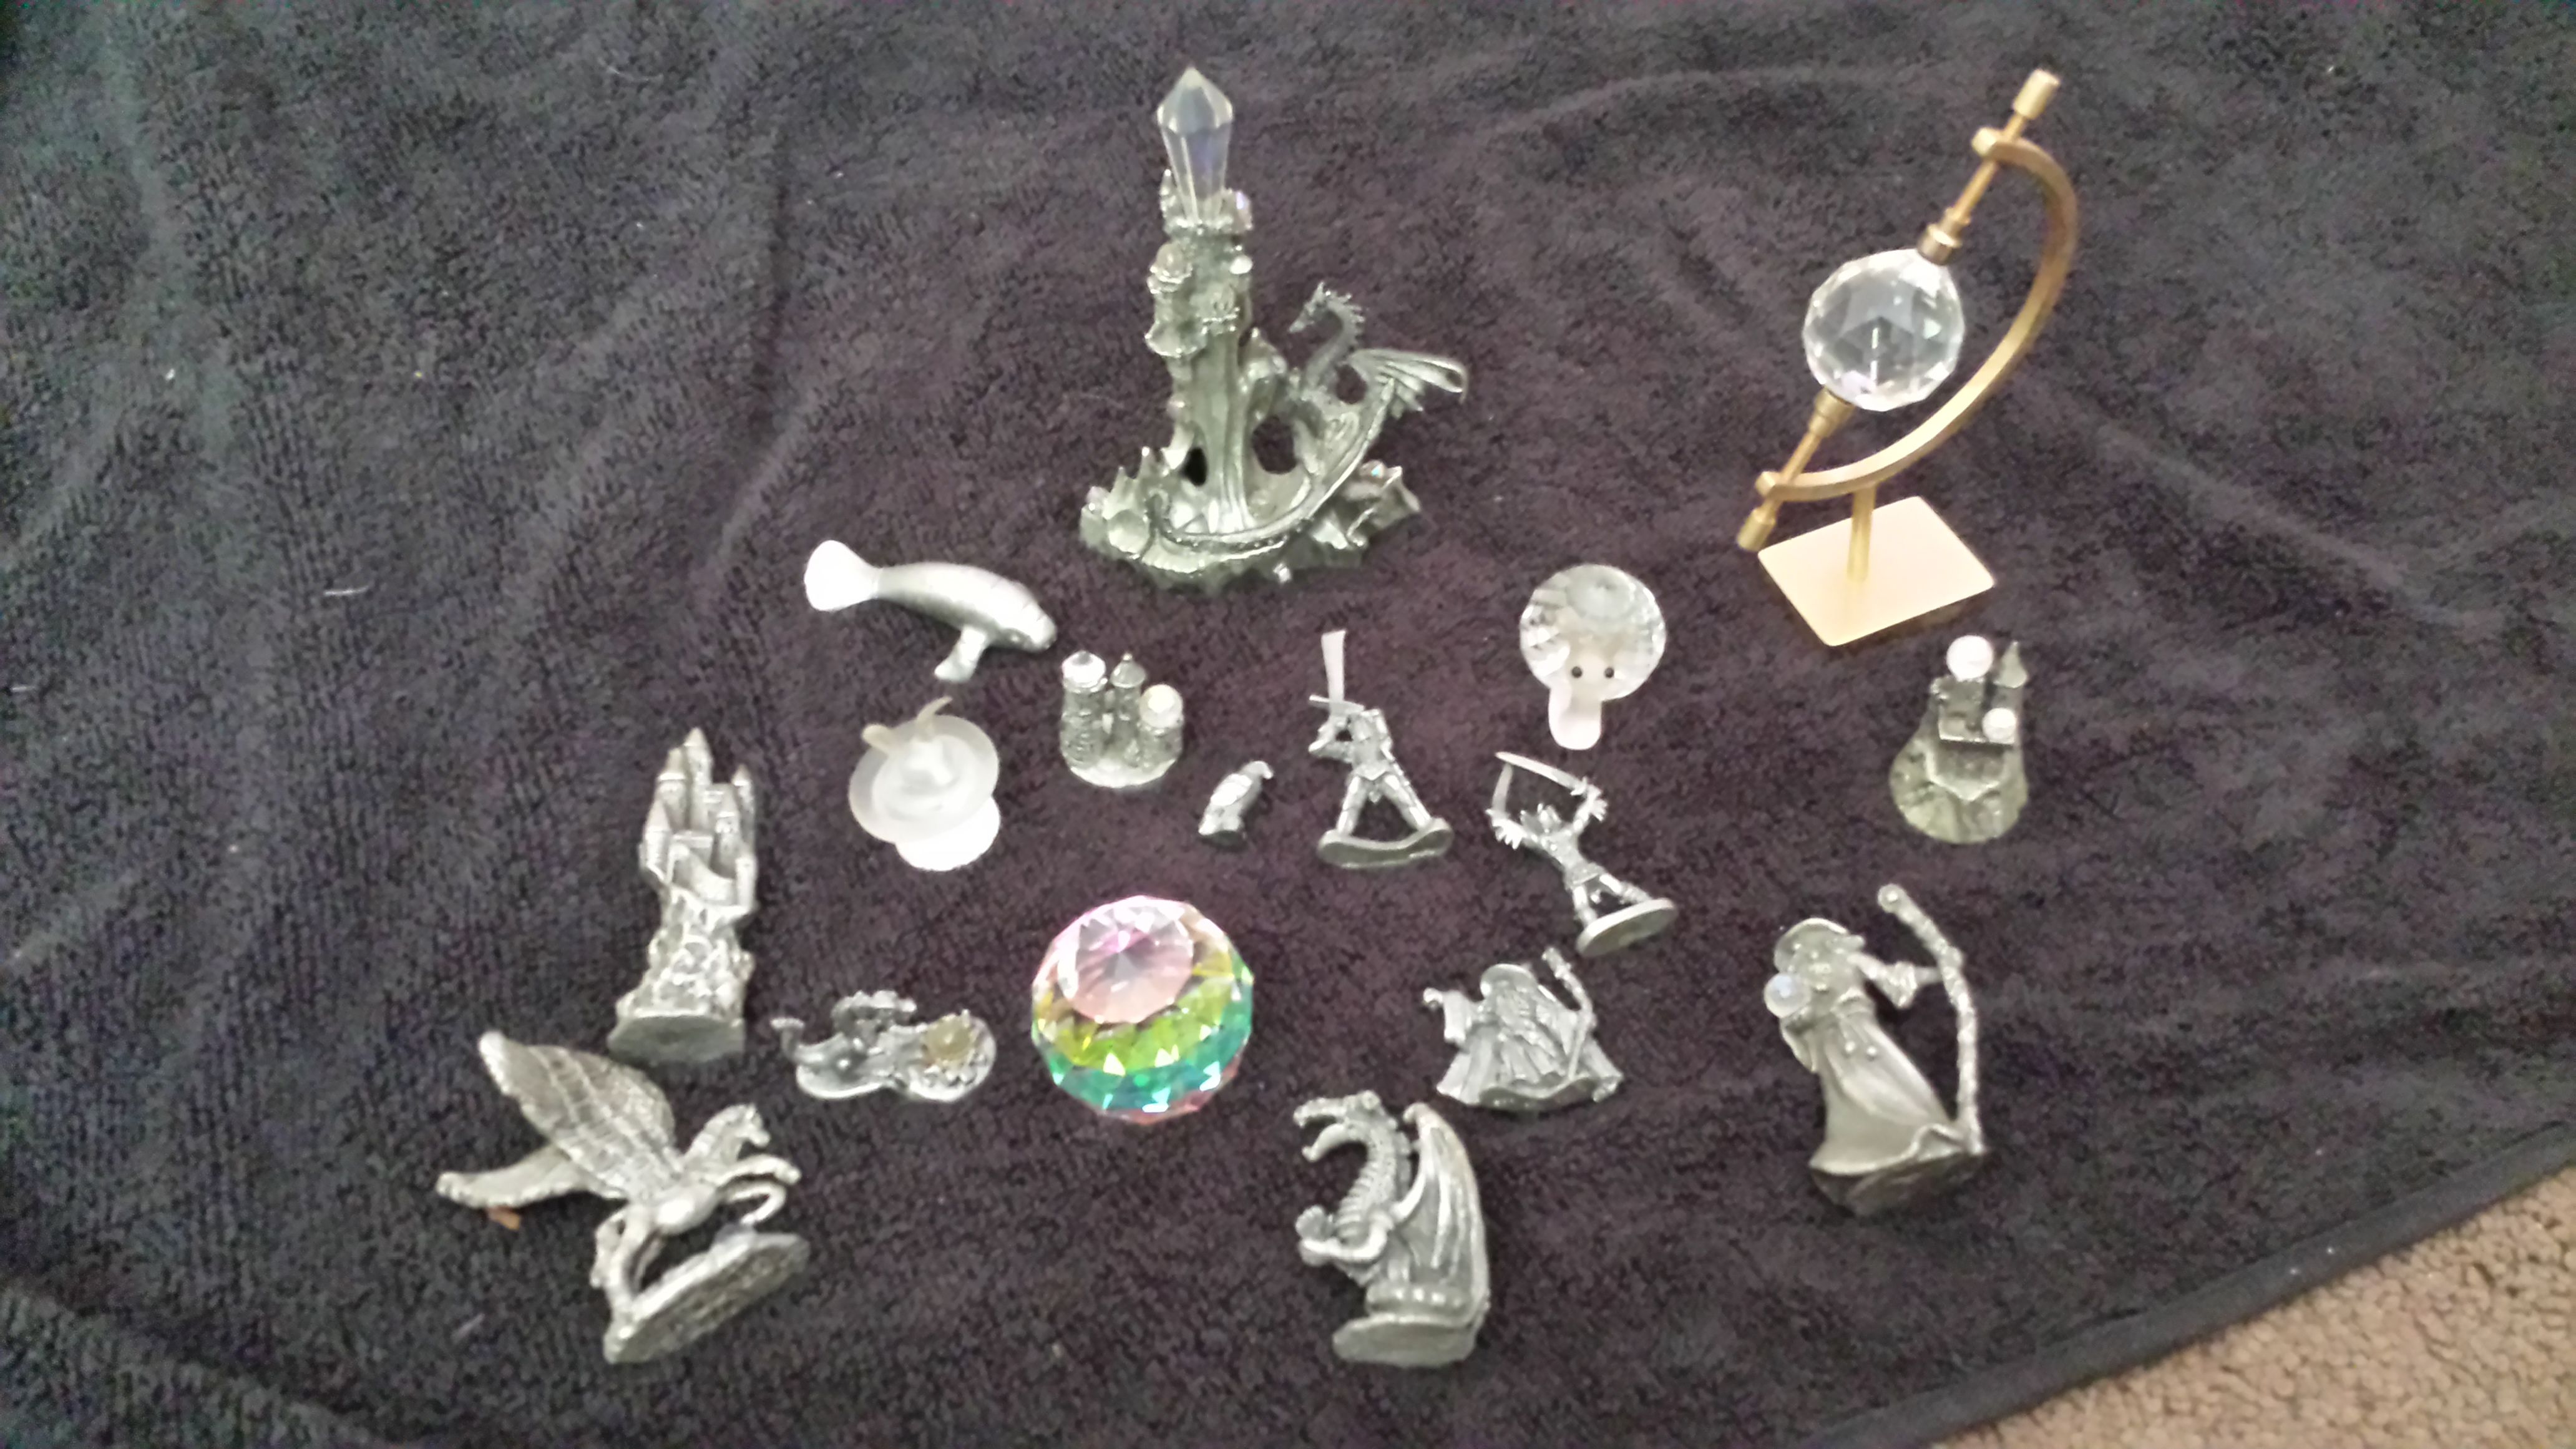 Crystal and Pewter collectibles